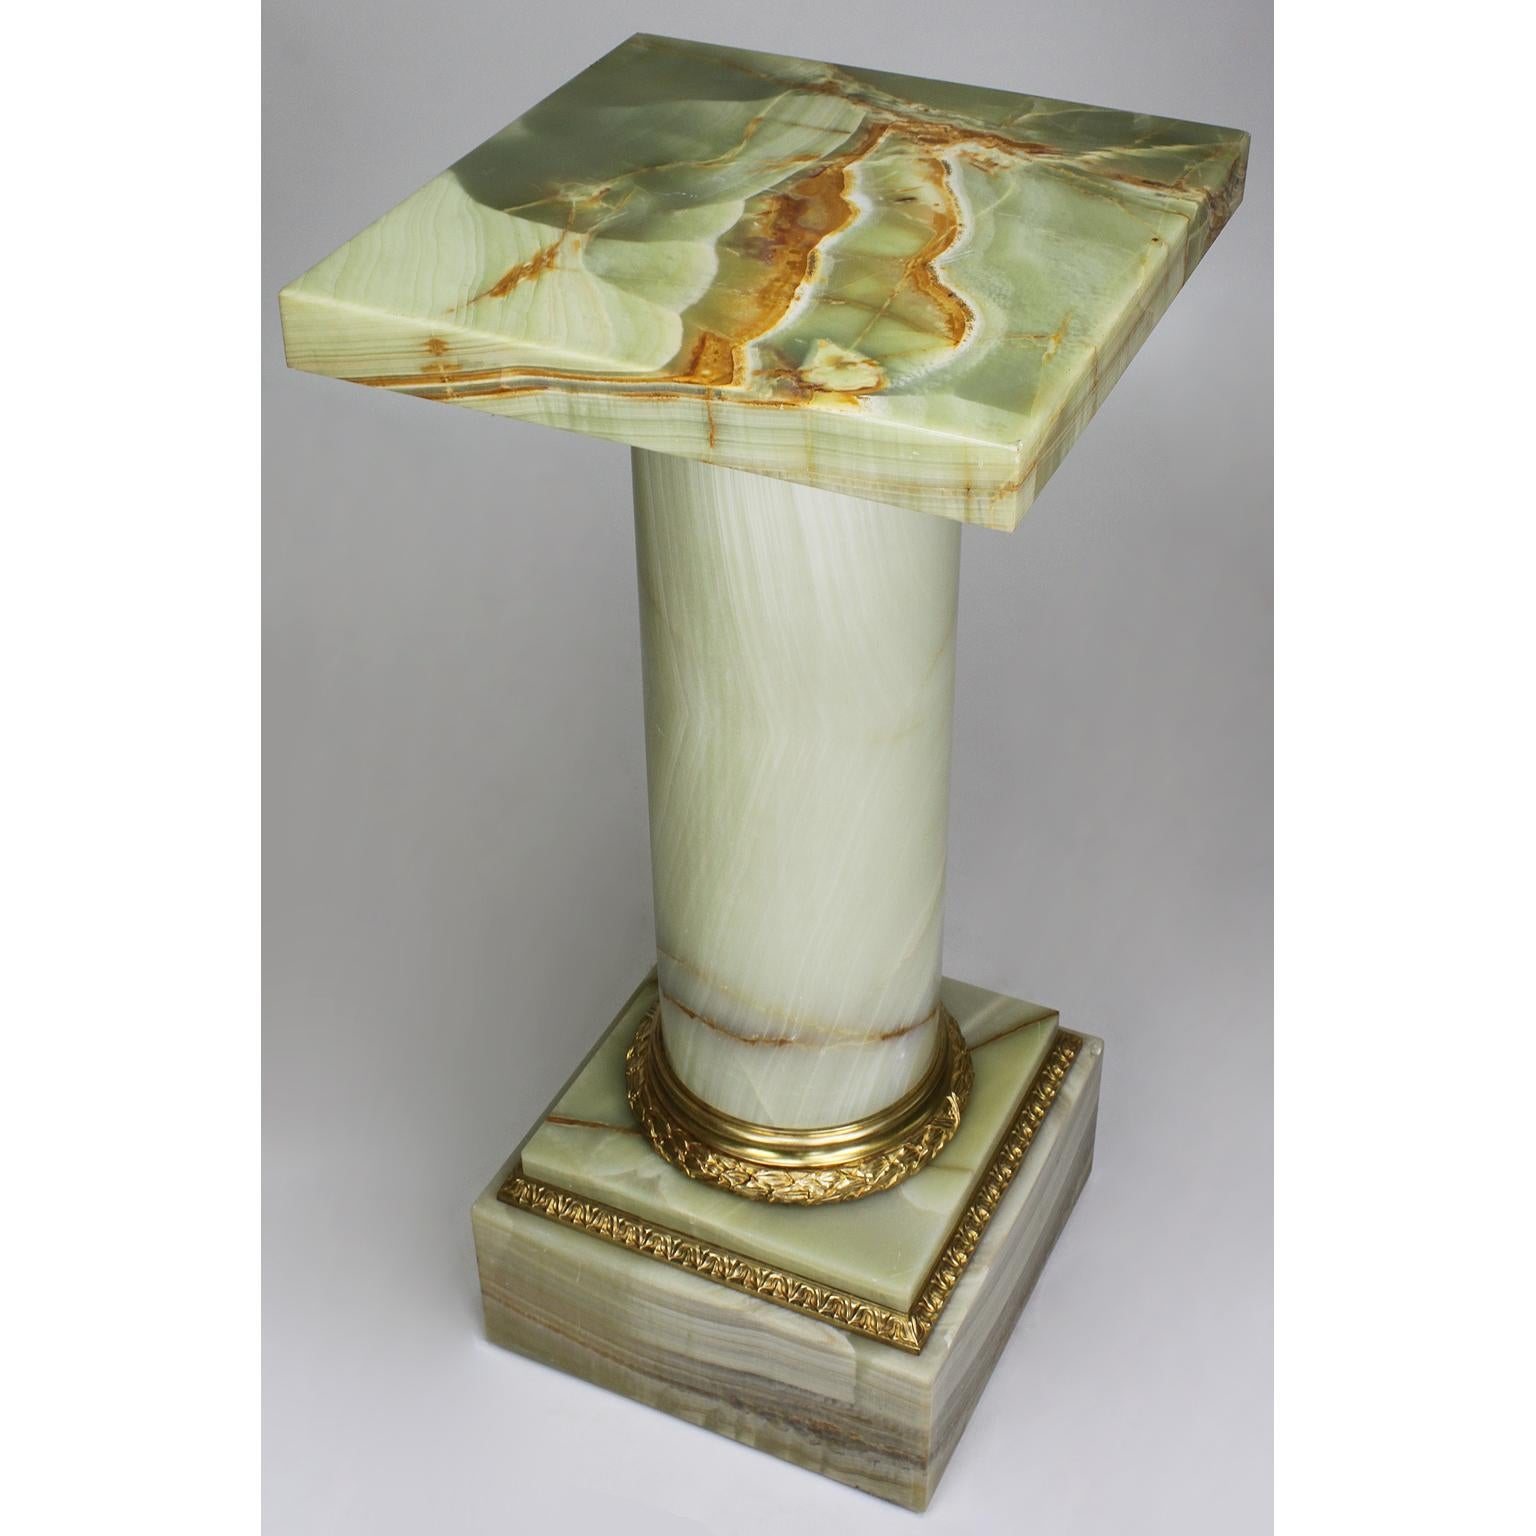 Gilt French 19th-20th Century Louis XVI Style Onyx and Ormolu Mounted Pedestal Stand